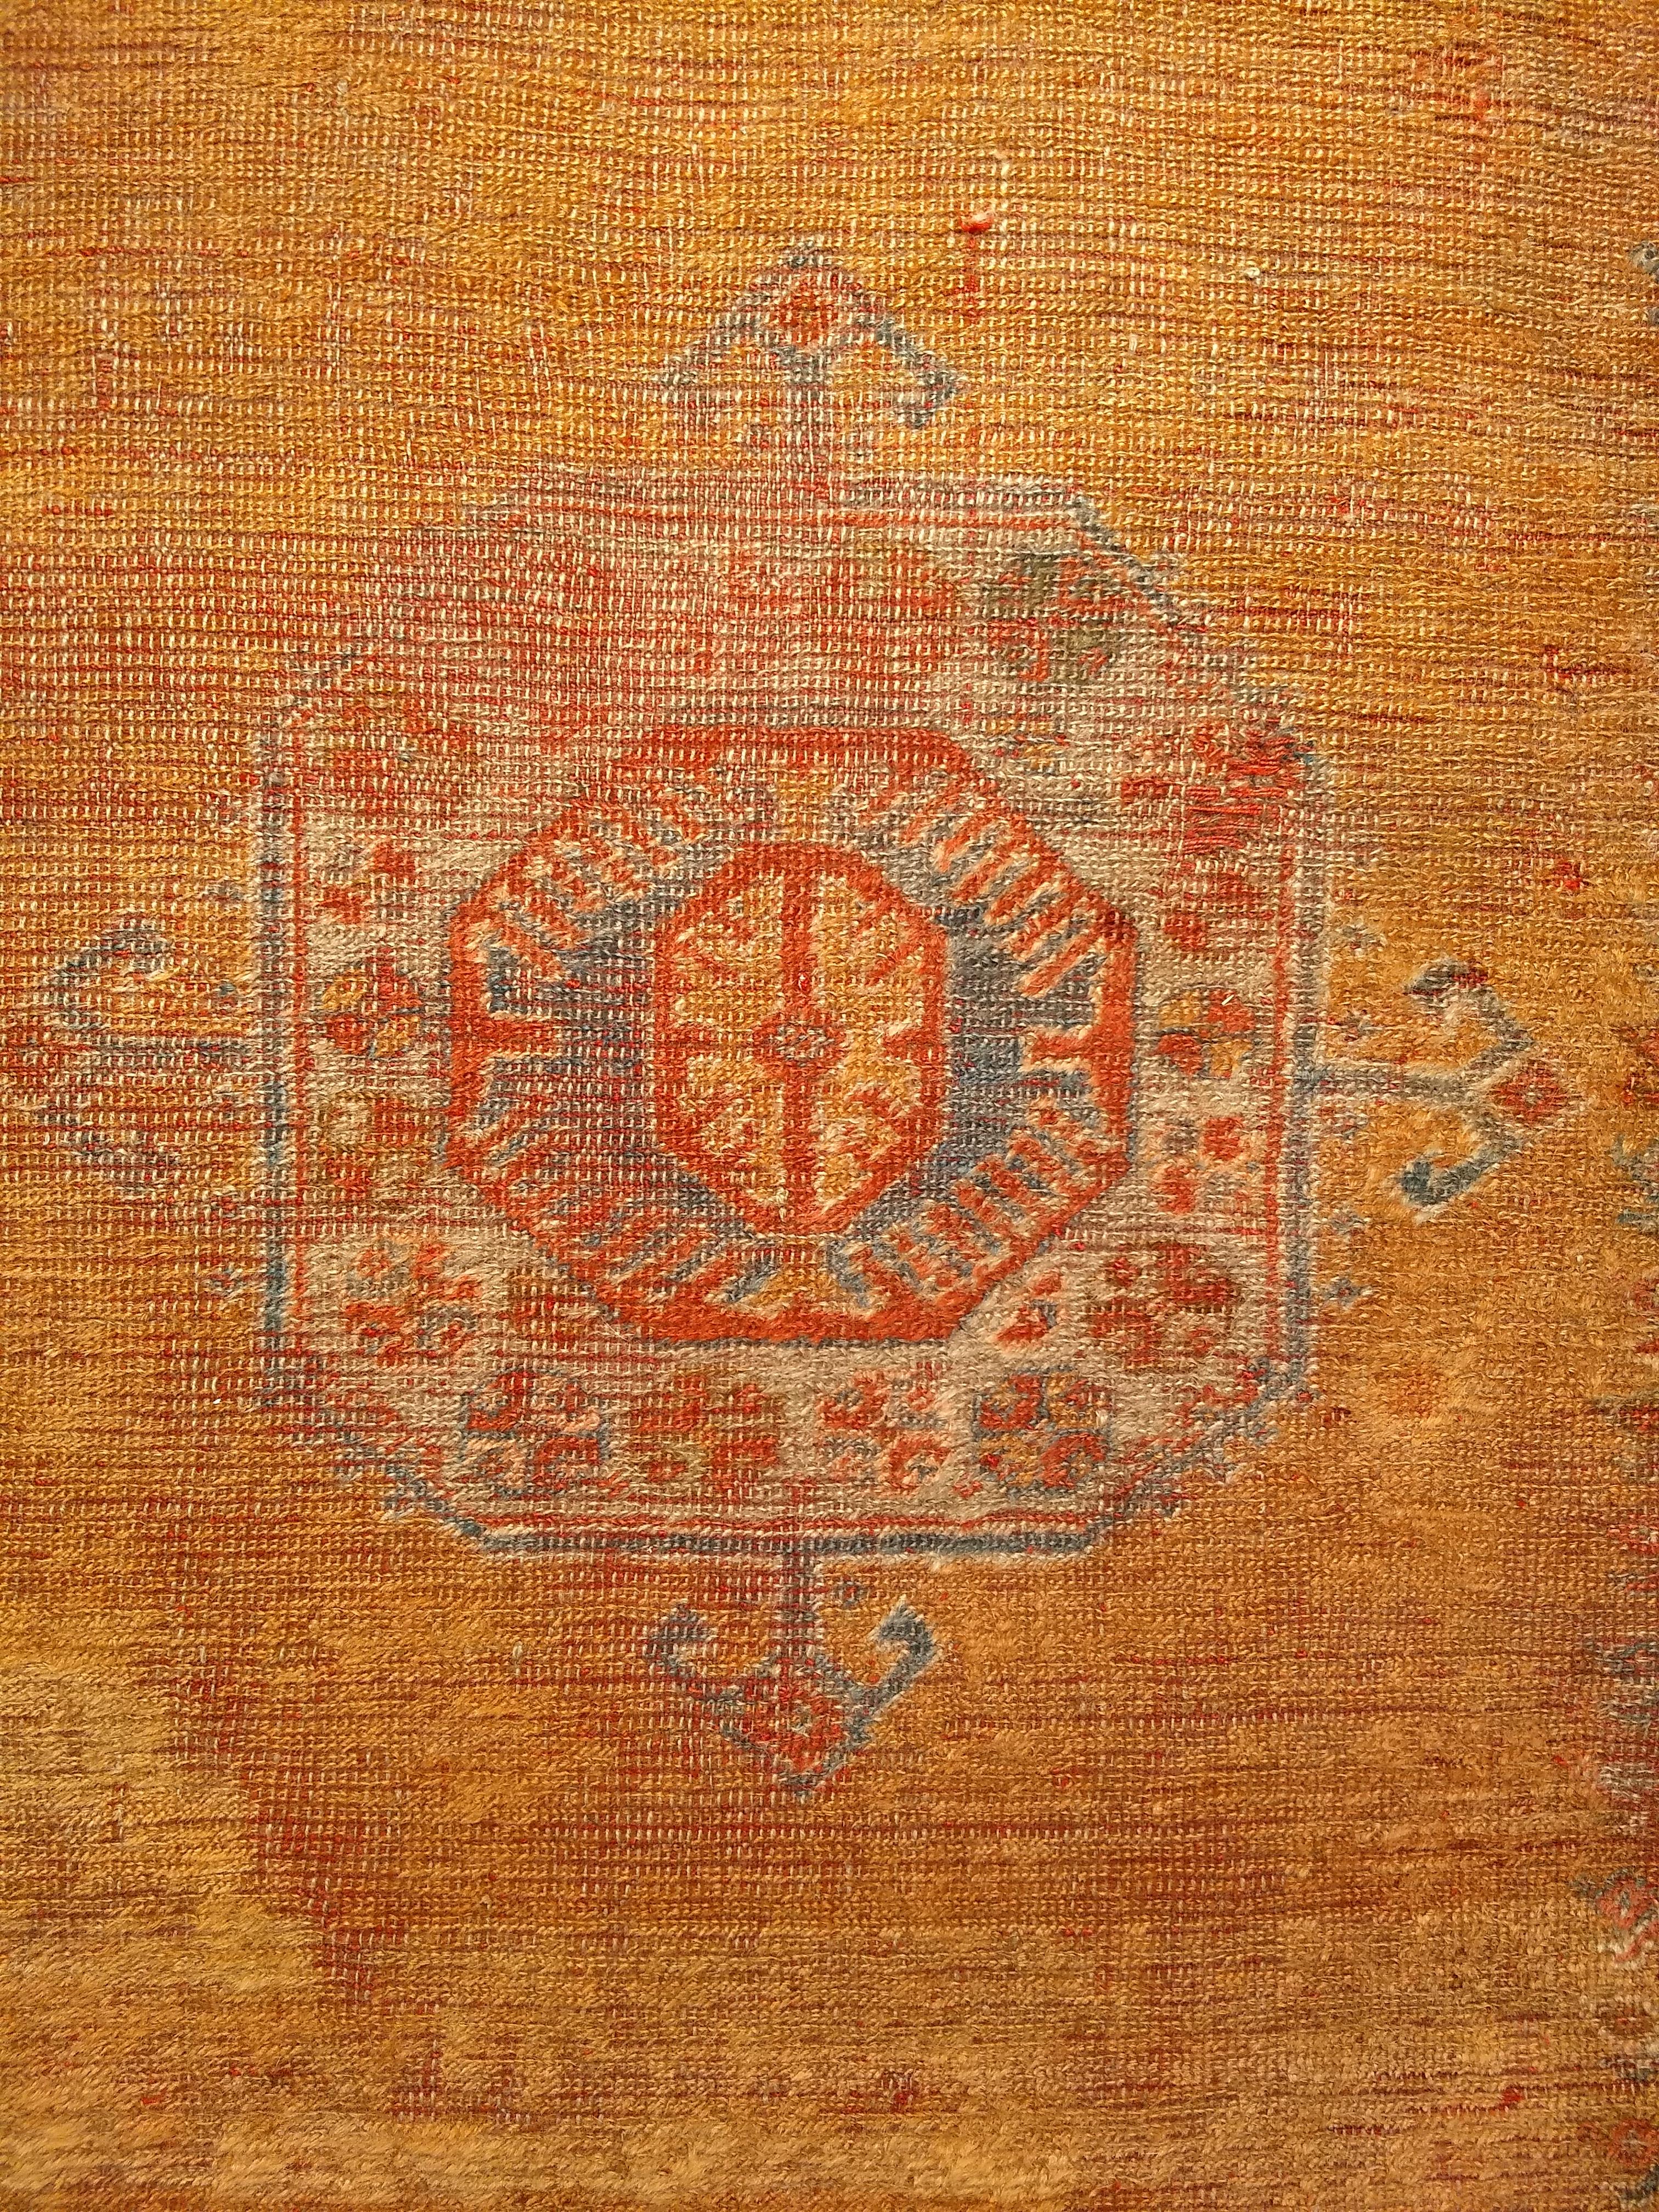 Late 19th Century Turkish Oushak Area Rug in Mamluk Pattern in Saffron, Teal For Sale 3